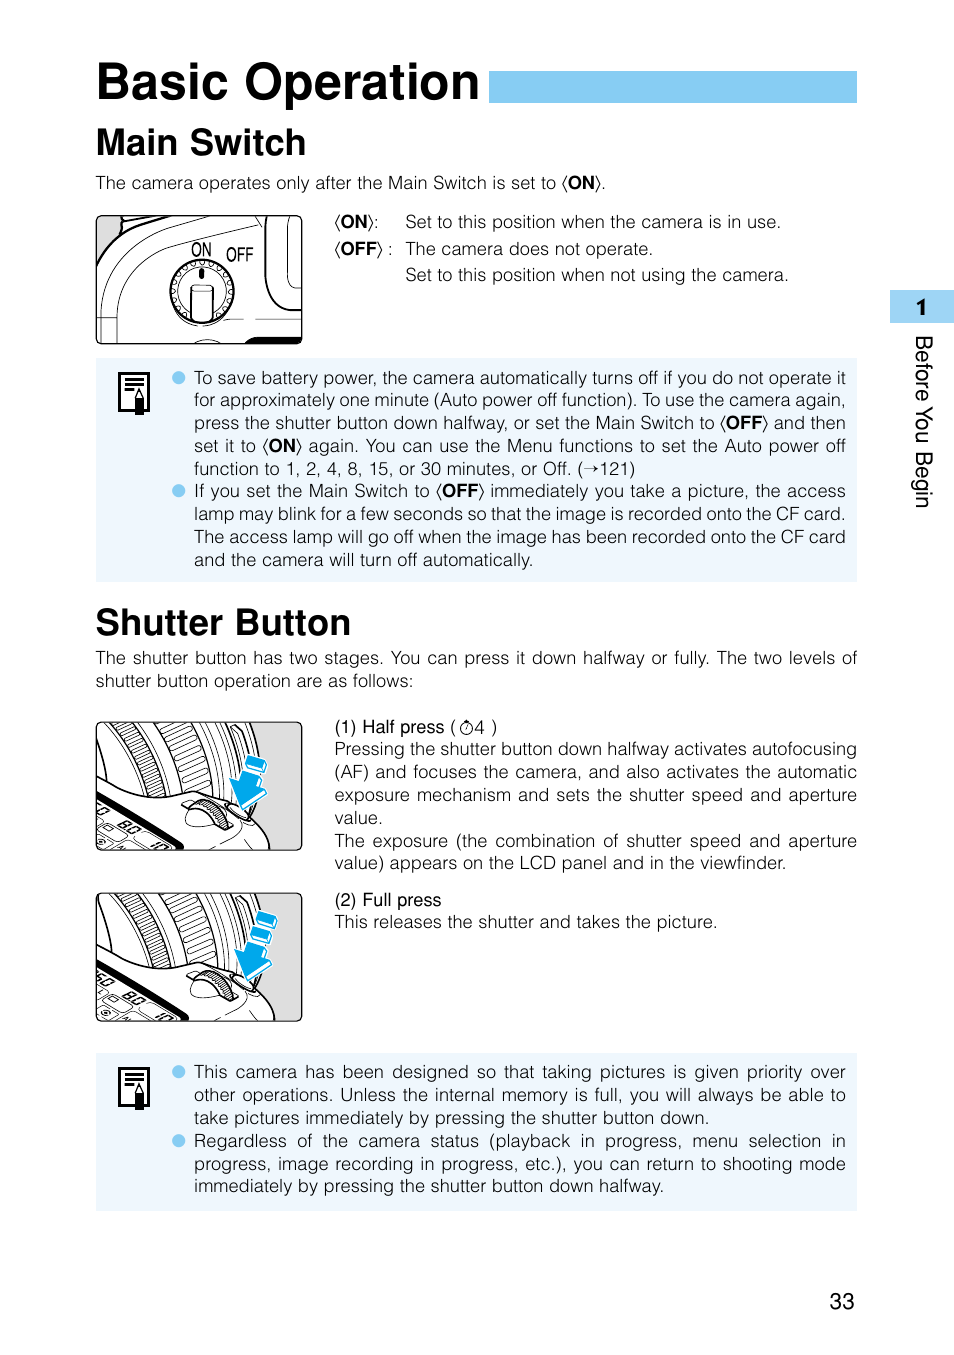 Basic operation, Shutter button, Main switch | Canon EOS D30 User Manual | Page 33 / 152